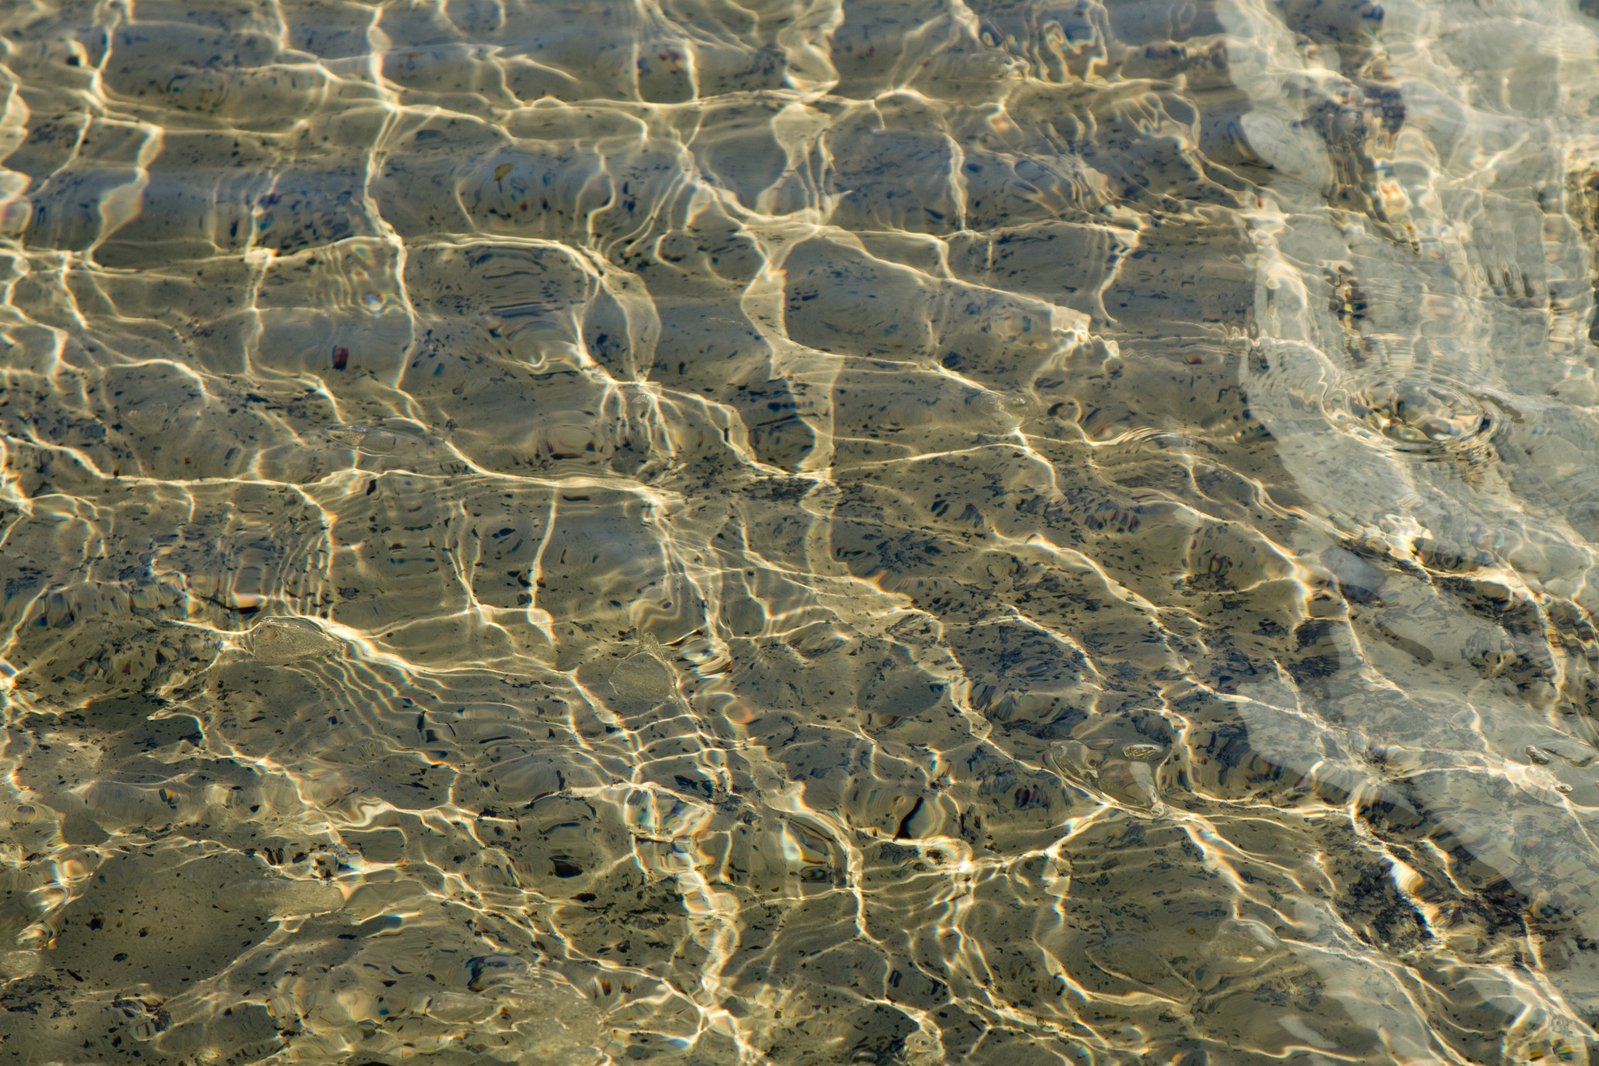 clear water covers the bottom of a shallow pool